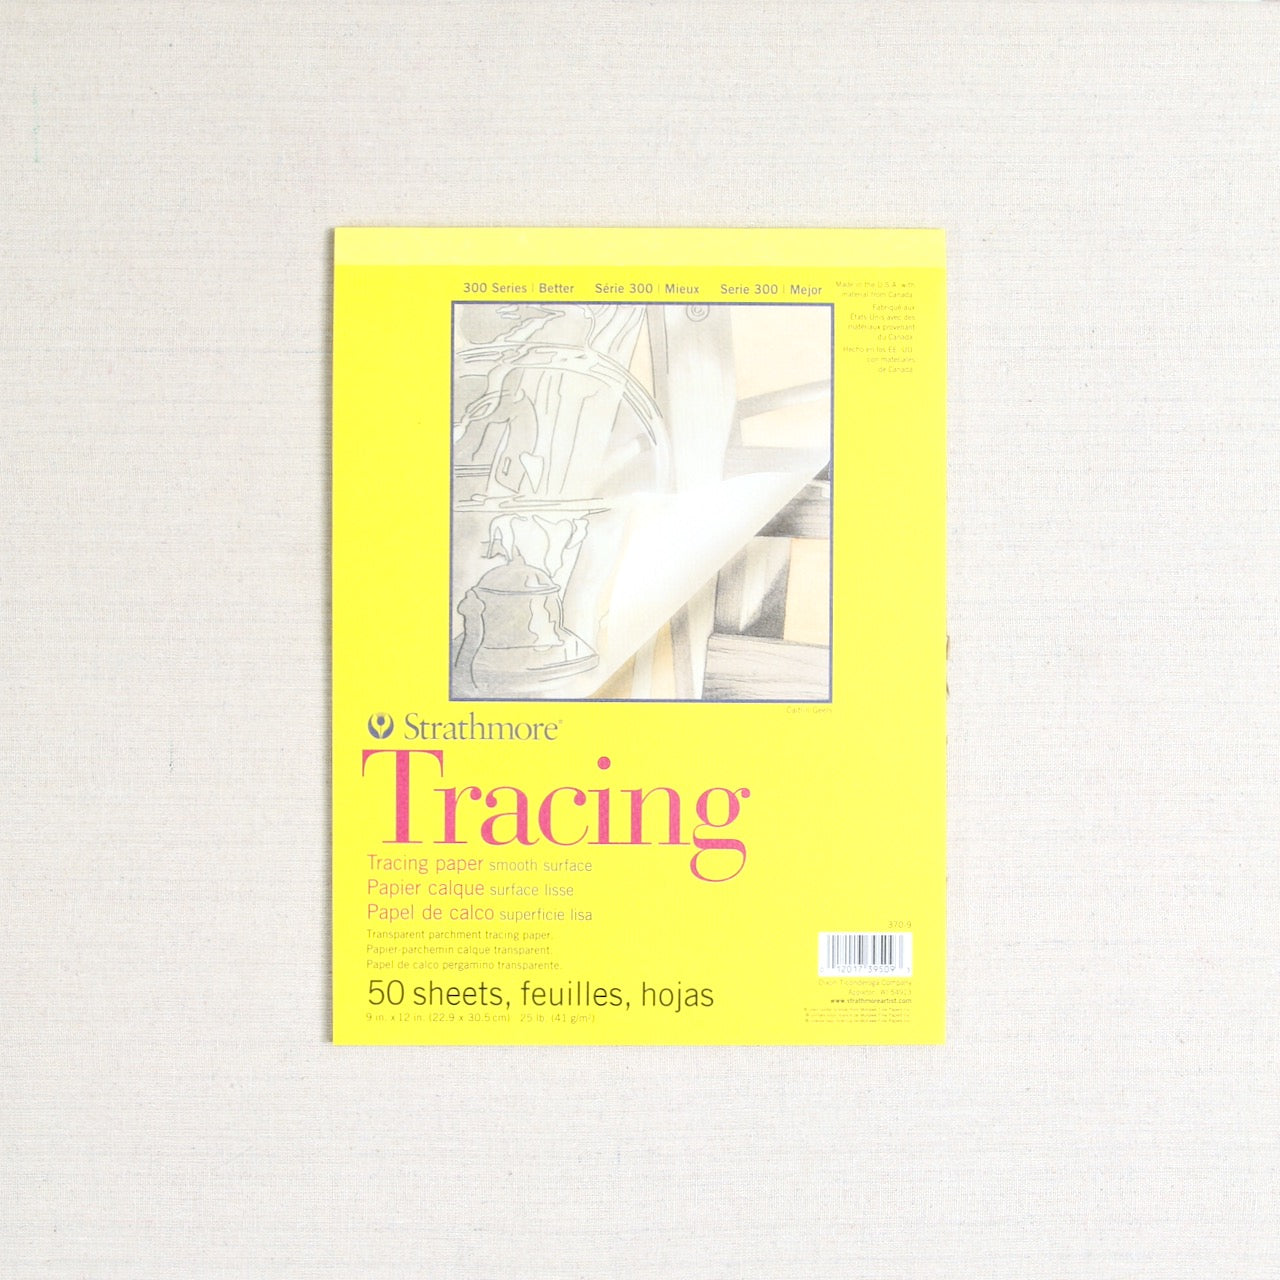 Tracing Paper, by Strathmore